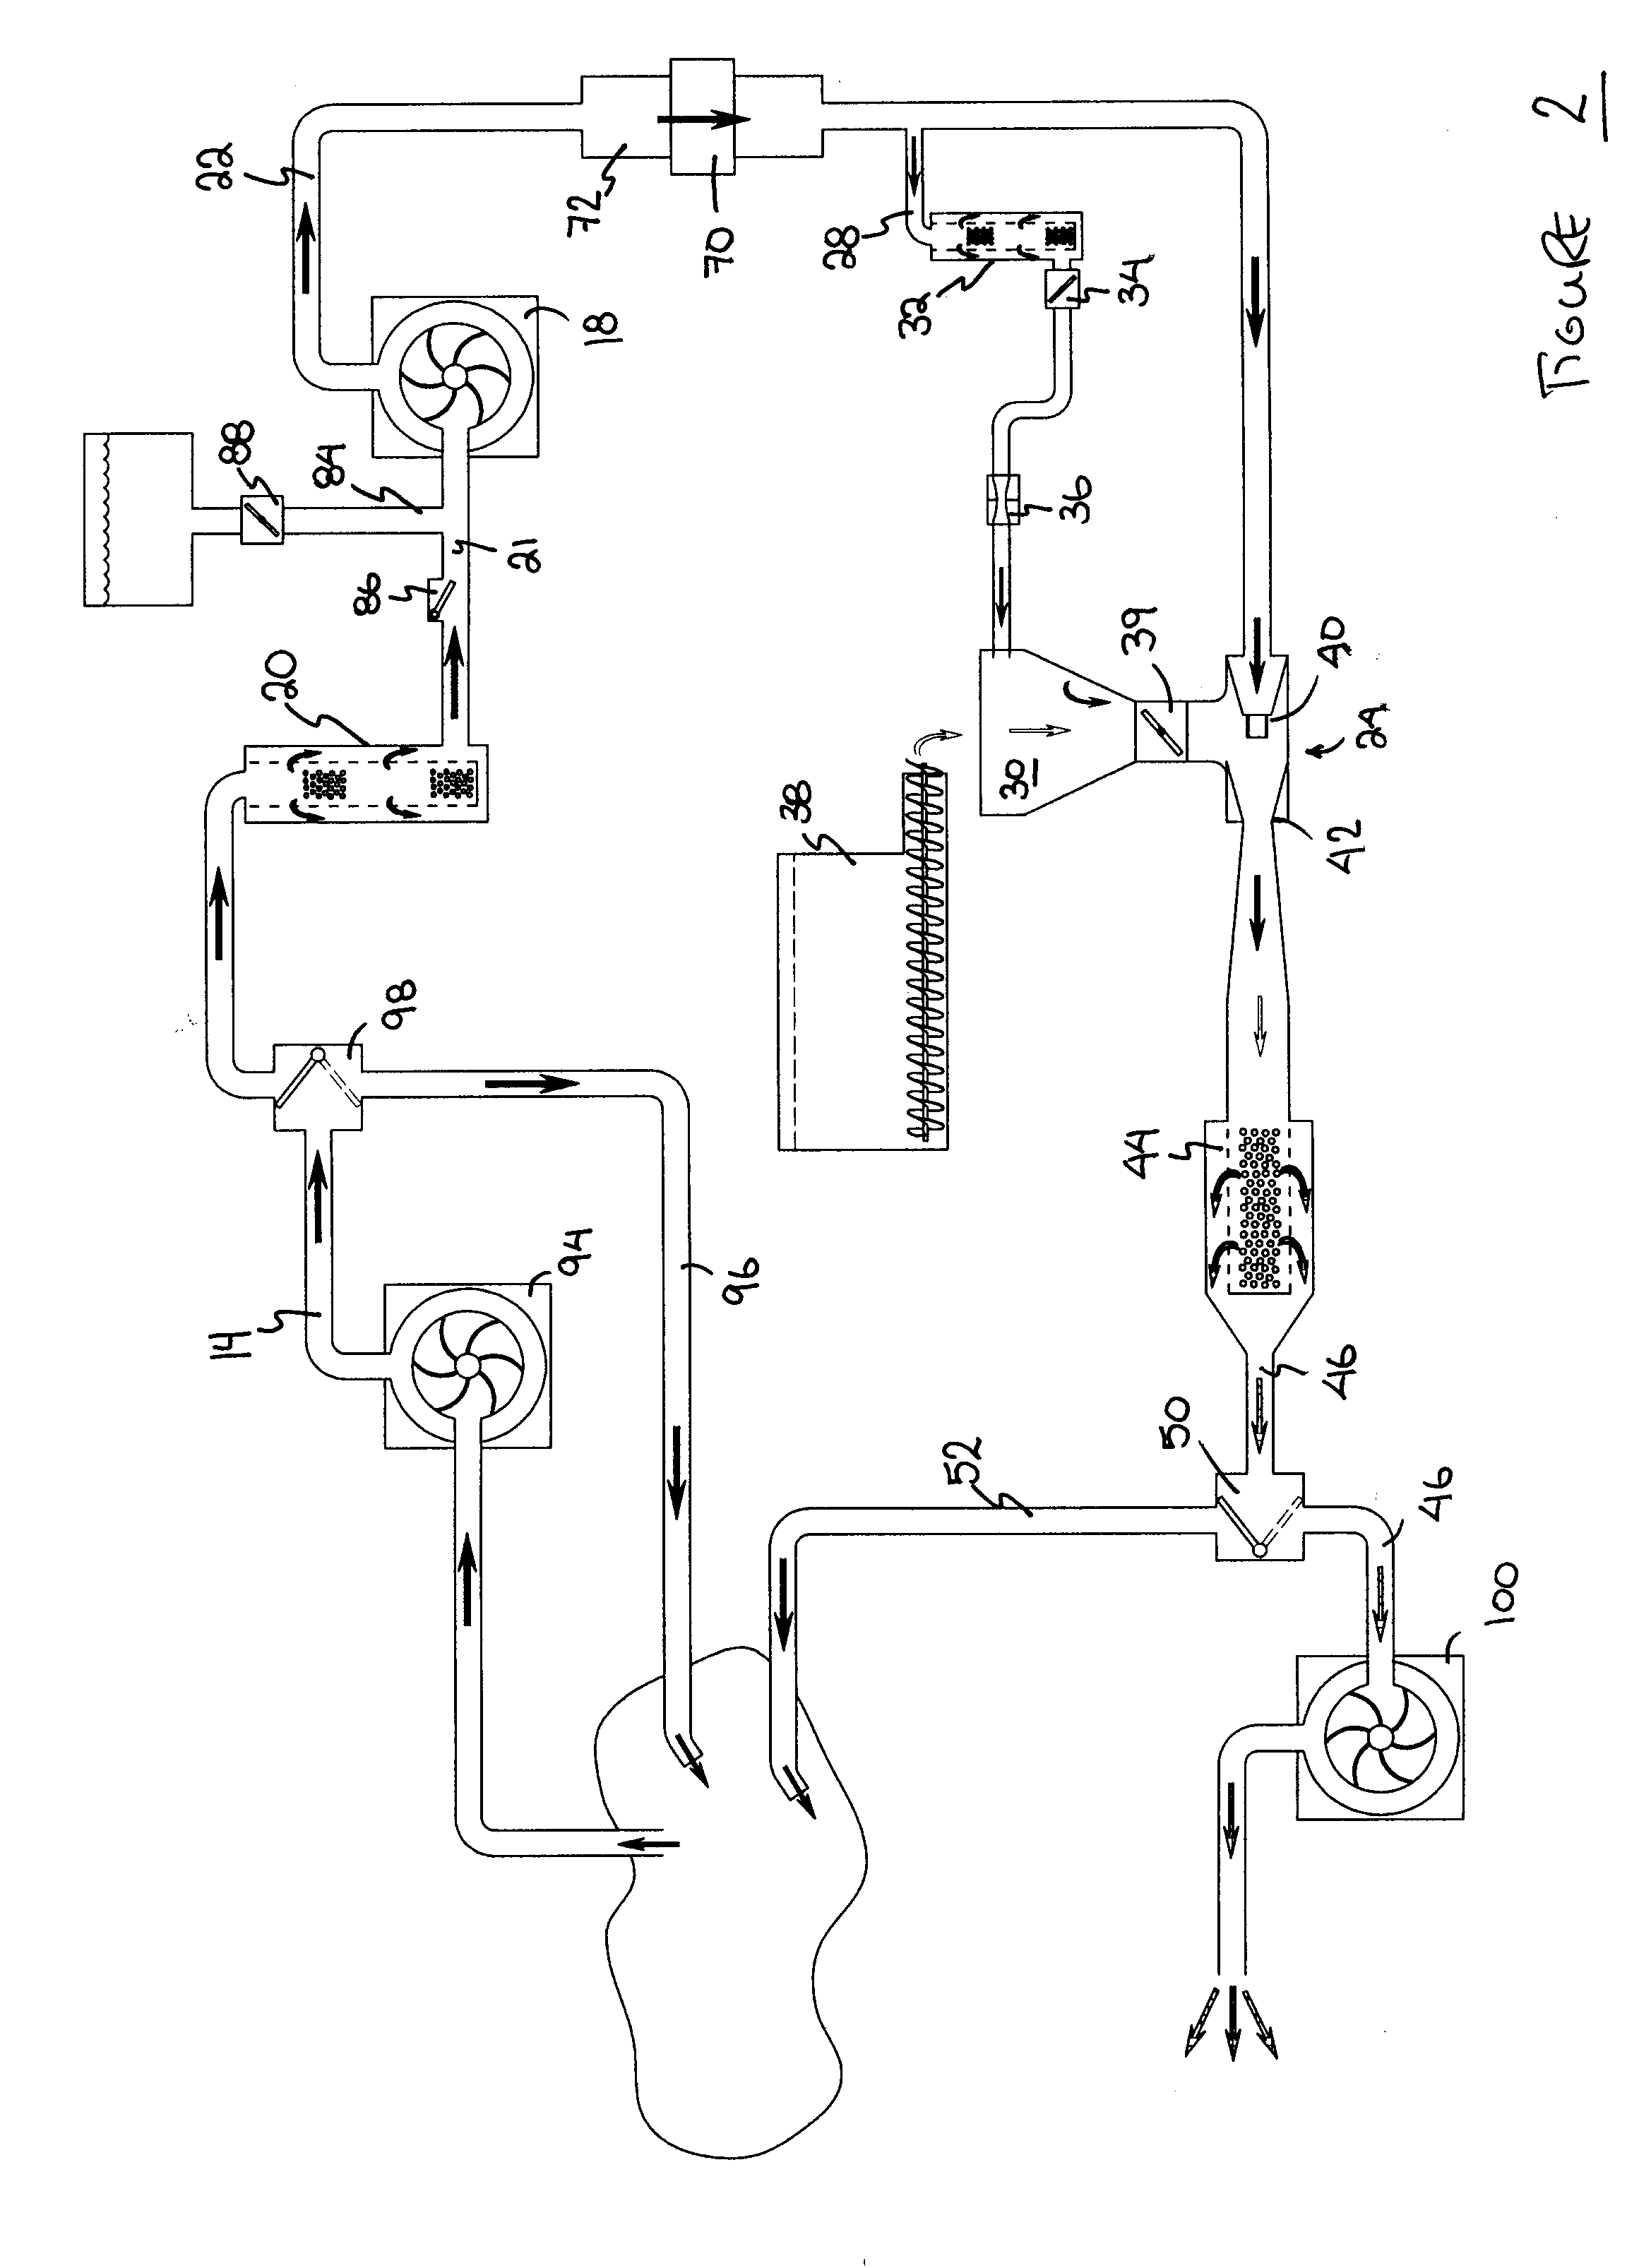 Apparatus and Process for the Incorporation of a Dry Treatment Product Into a Liquid Waste